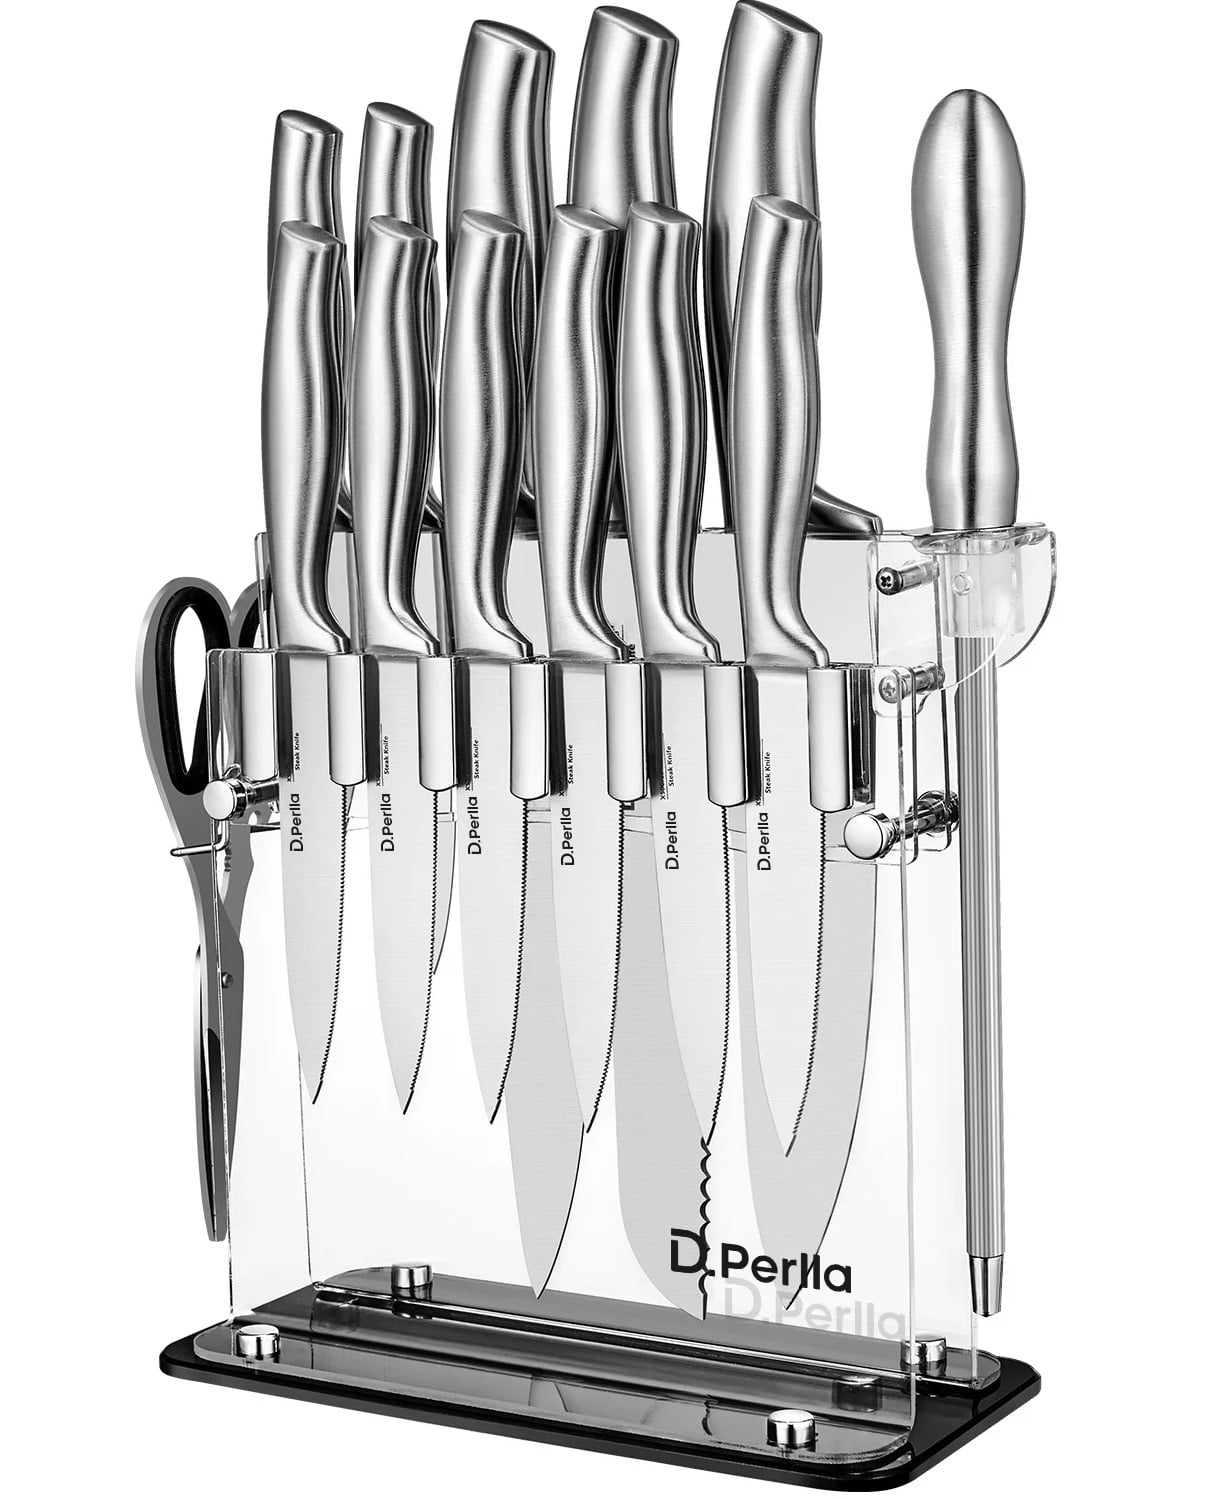 Mueller Deluxe Knife Set With Block, Stainless Steel Pro 7-Piece Ultra  Sharp Kitchen Knife Set with Acrylic Stand 